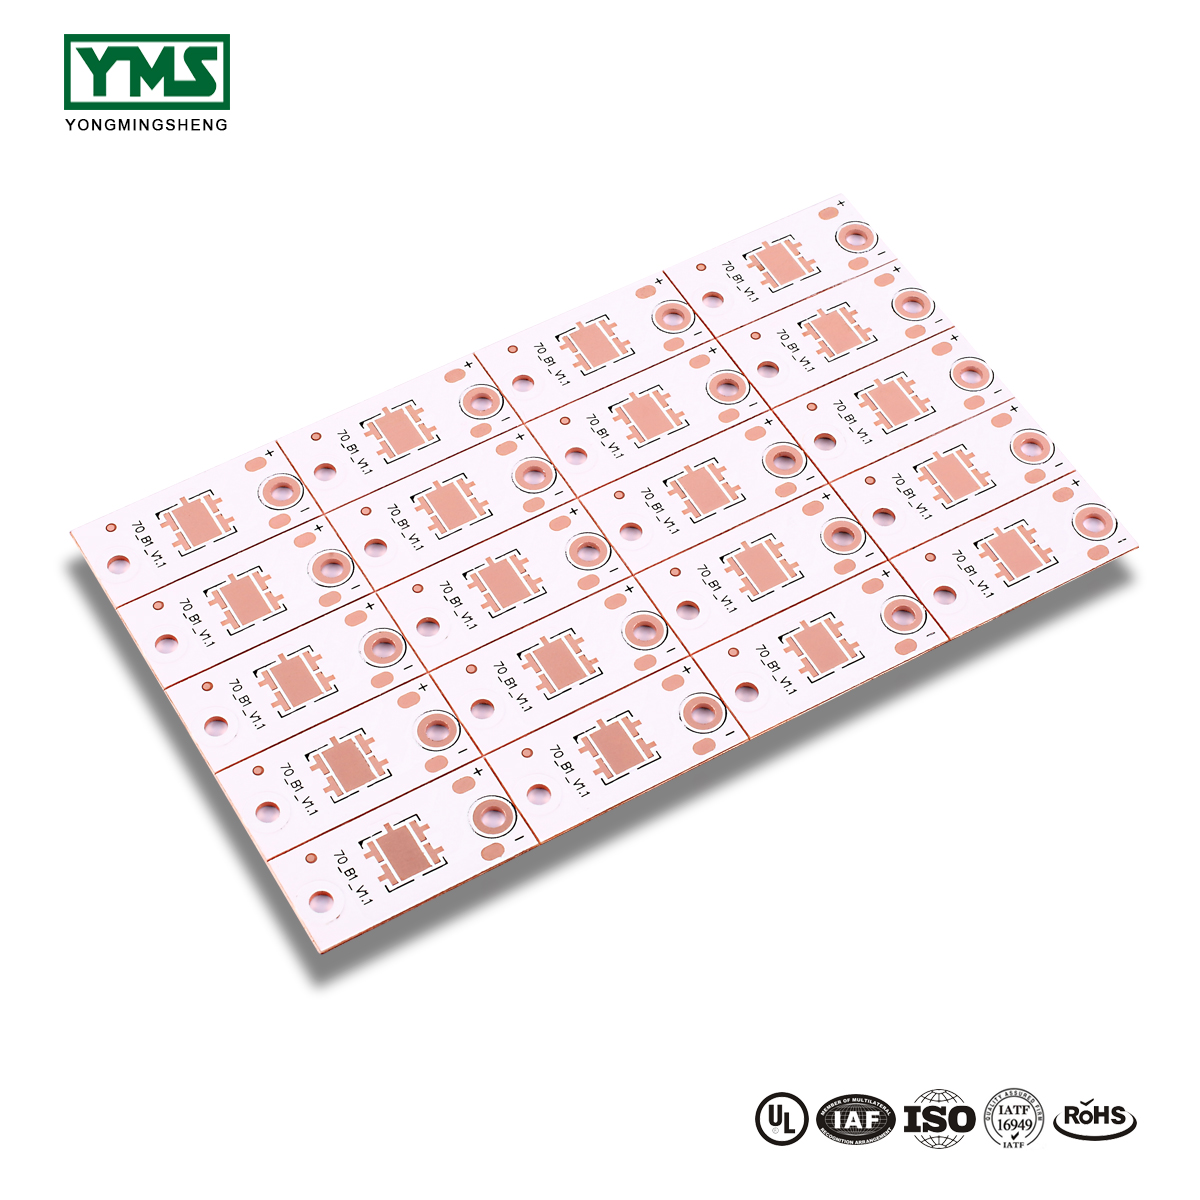 2017 High quality Specialize Pcb - 1Layer Thermoelectric Copper base Board | YMSPCB – Yongmingsheng